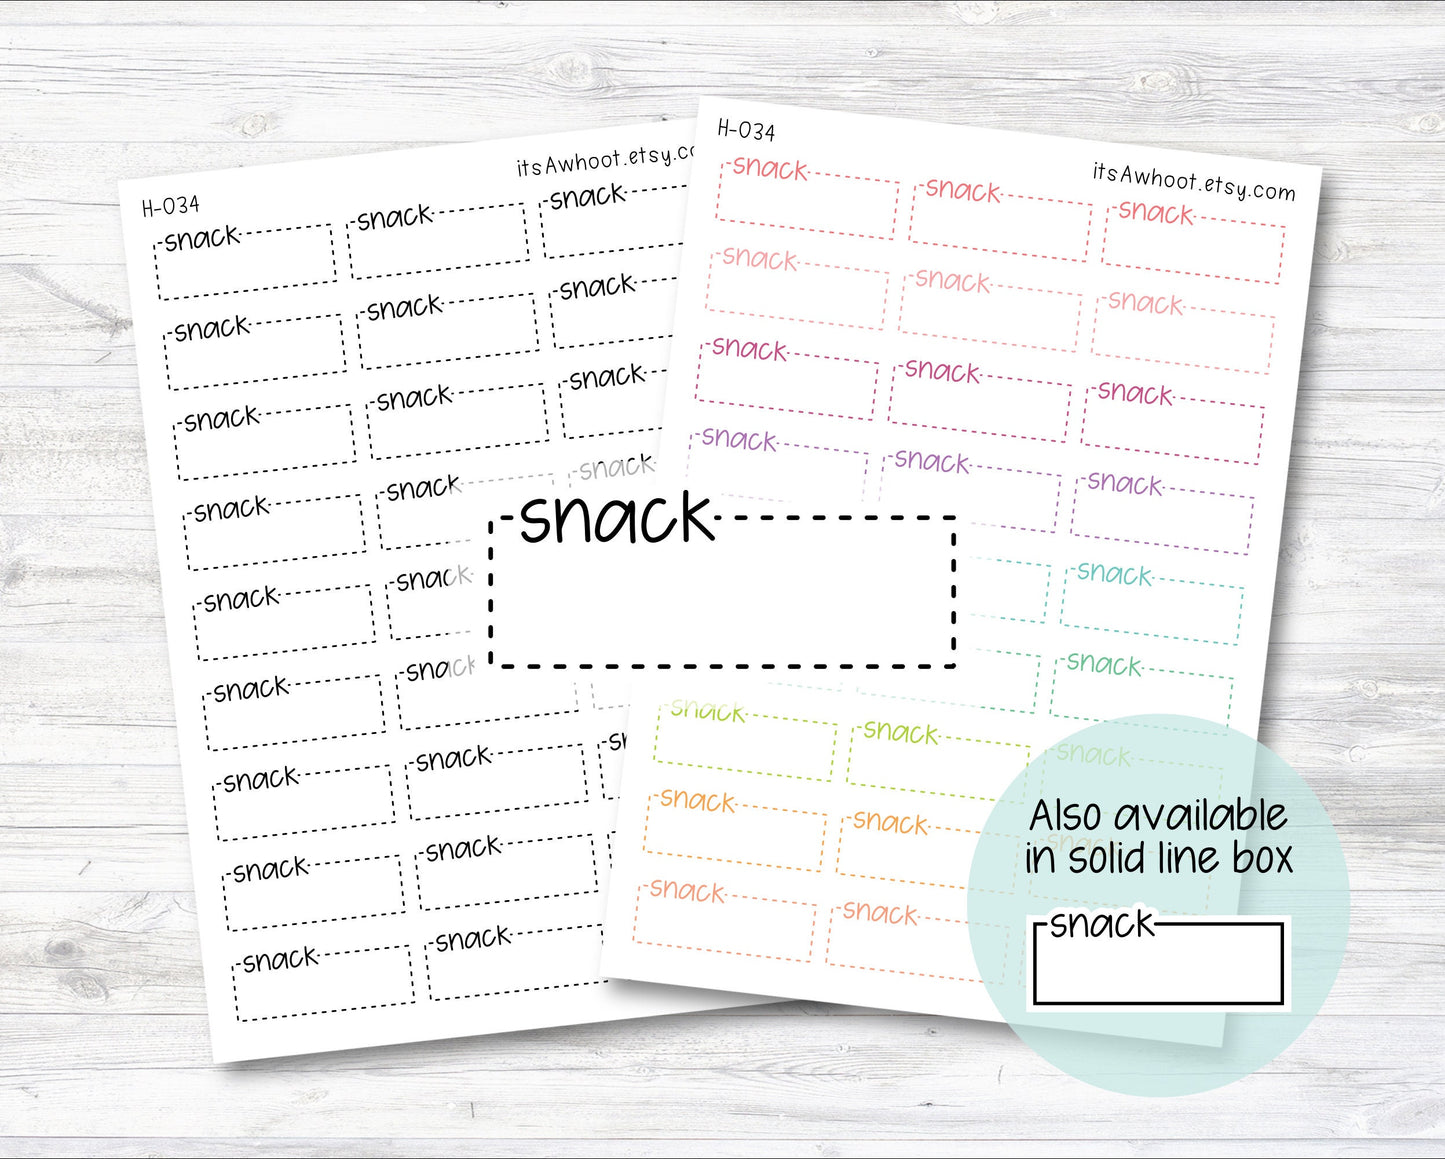 SNACK Quarter Box Label Planner Stickers - Dash or Solid (H034)